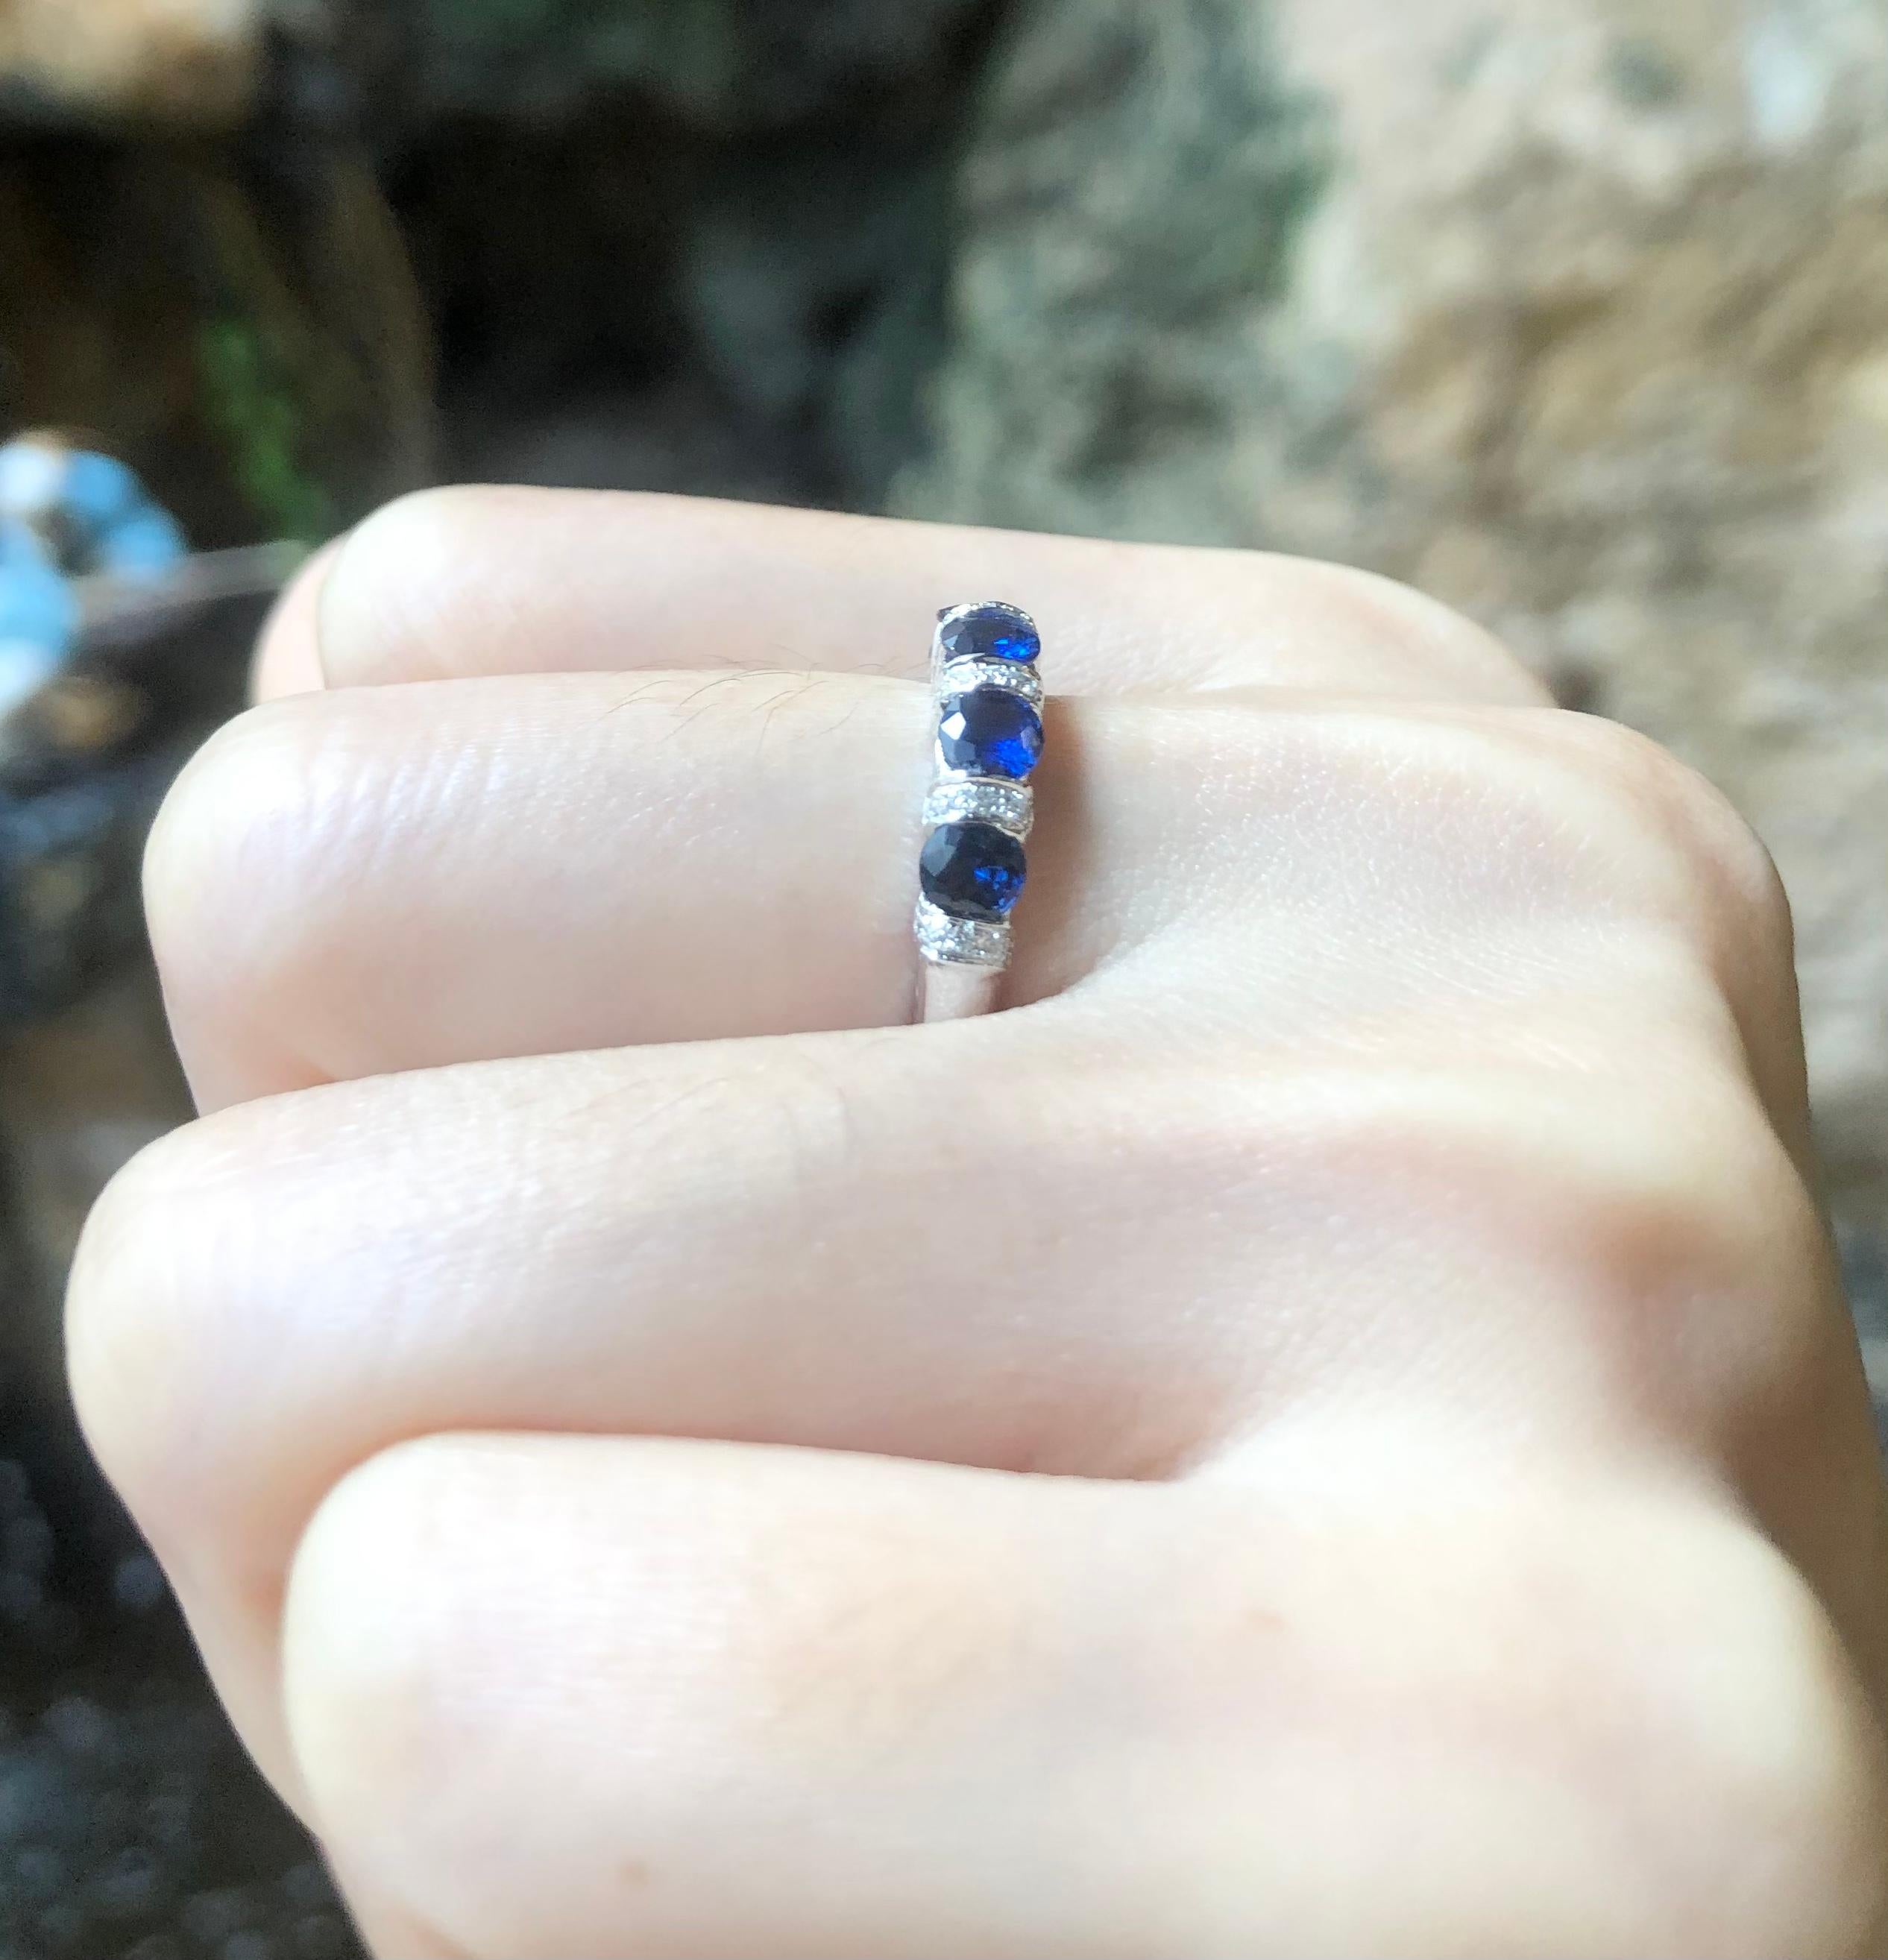 Blue Sapphire 1.13 carats with Diamond 0.11 carat Ring set in 18 Karat White Gold Settings

Width:  2.0 cm 
Length: 0.4 cm
Ring Size: 50
Total Weight: 3.58 grams


